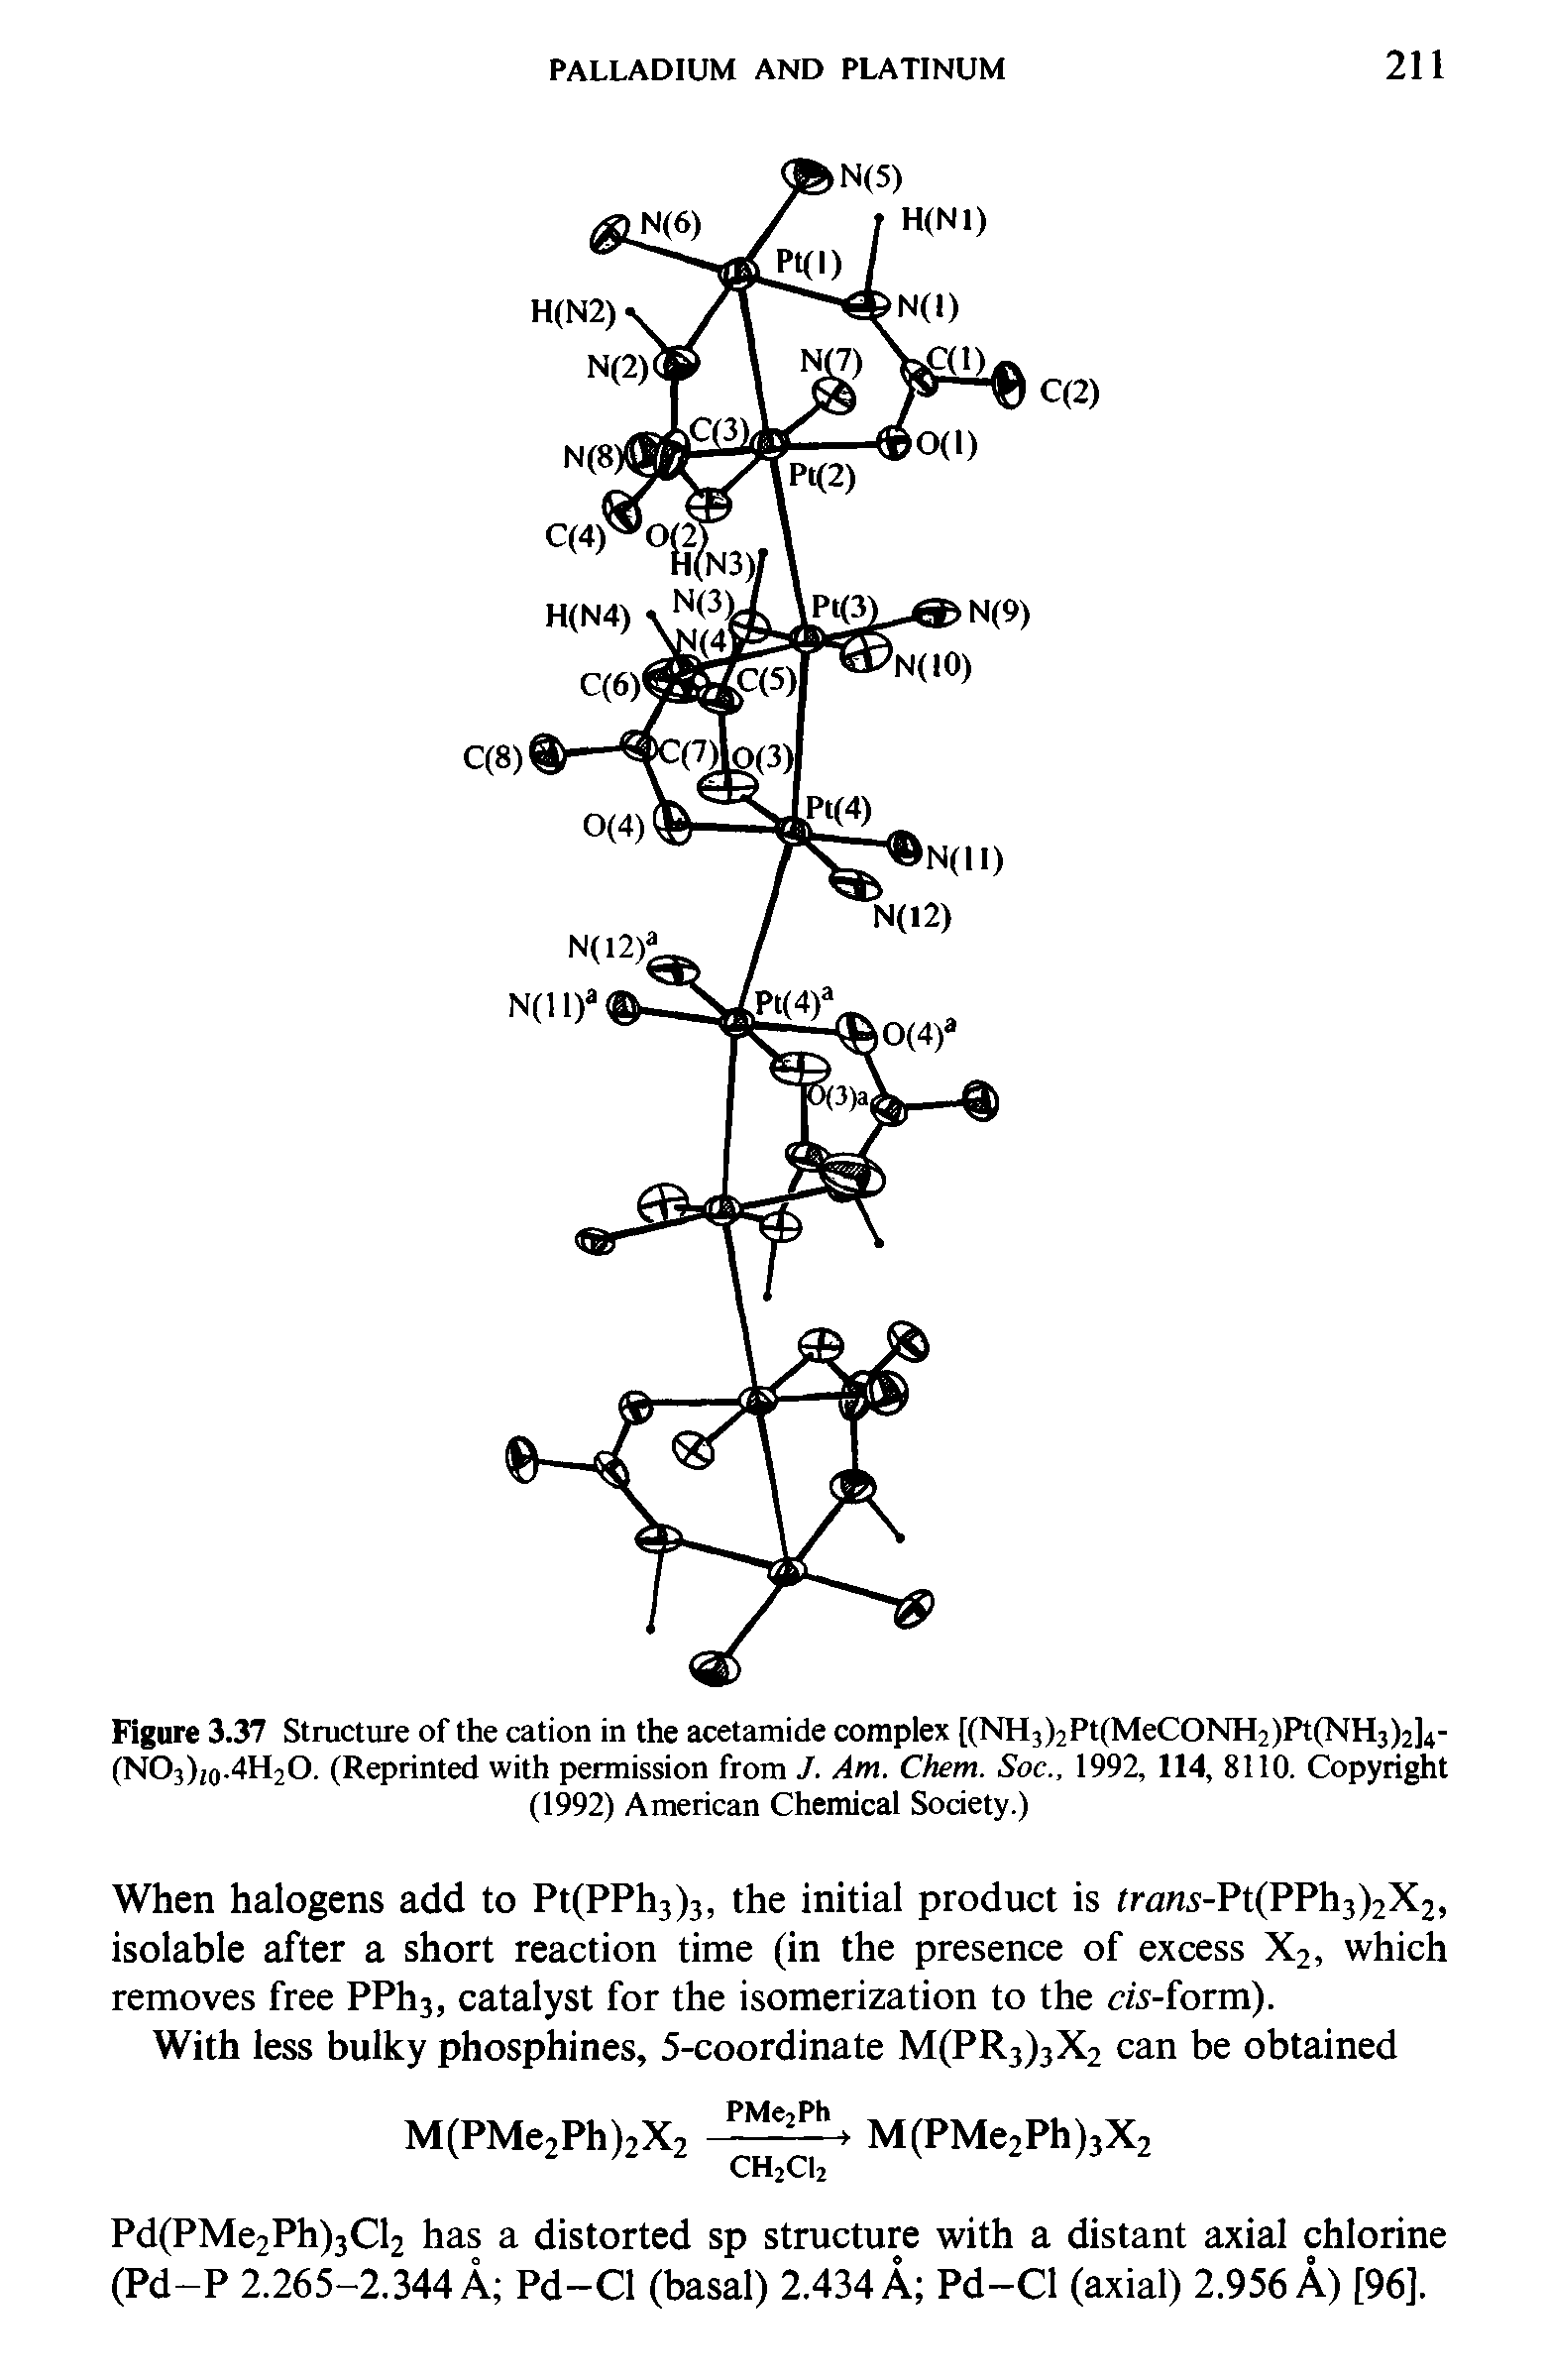 Figure 3.37 Structure of the cation in the acetamide complex [(Nh PtfMeCONFyPtfNHj U-(NO3) 0.4H2O. (Reprinted with permission from J. Am. Chem. Soc., 1992, 114, 8110. Copyright (1992) American Chemical Society.)...